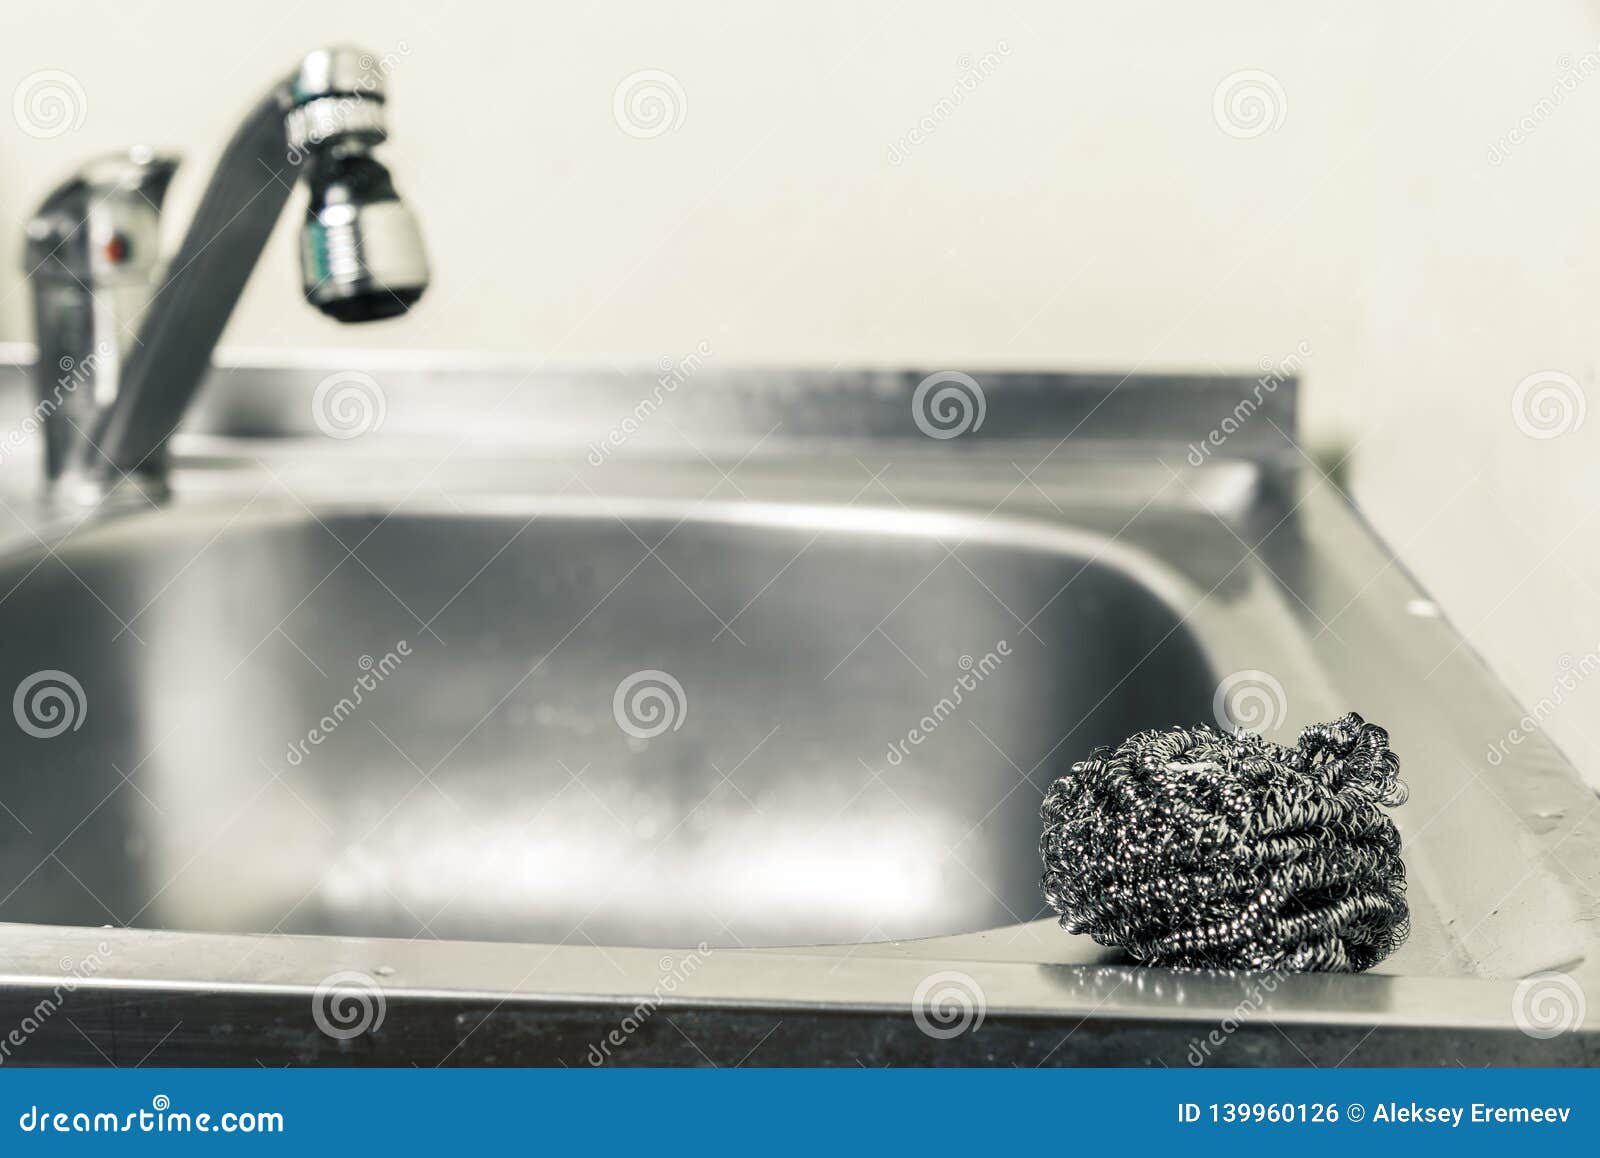 Clean Sink With Faucet Stock Photo Image Of Home Kitchen 139960126